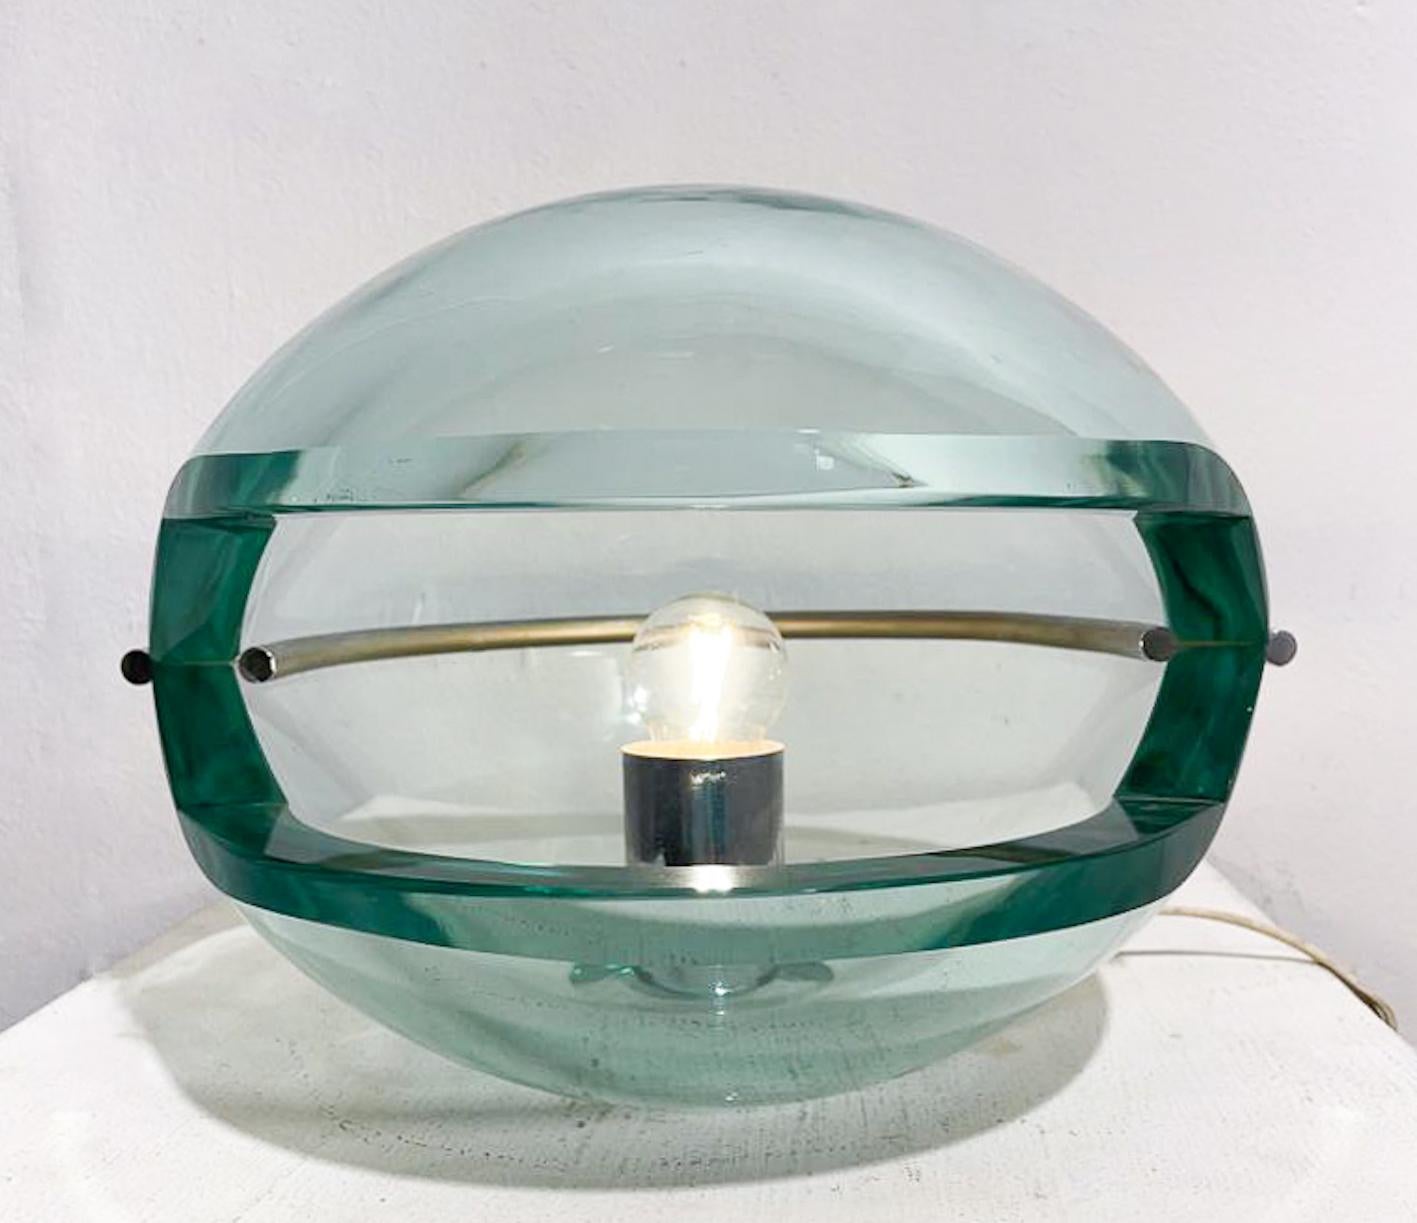 Italian Mid-Century Modern Table Lamp, Italy, 1970s - In the style of fontana Arte  For Sale